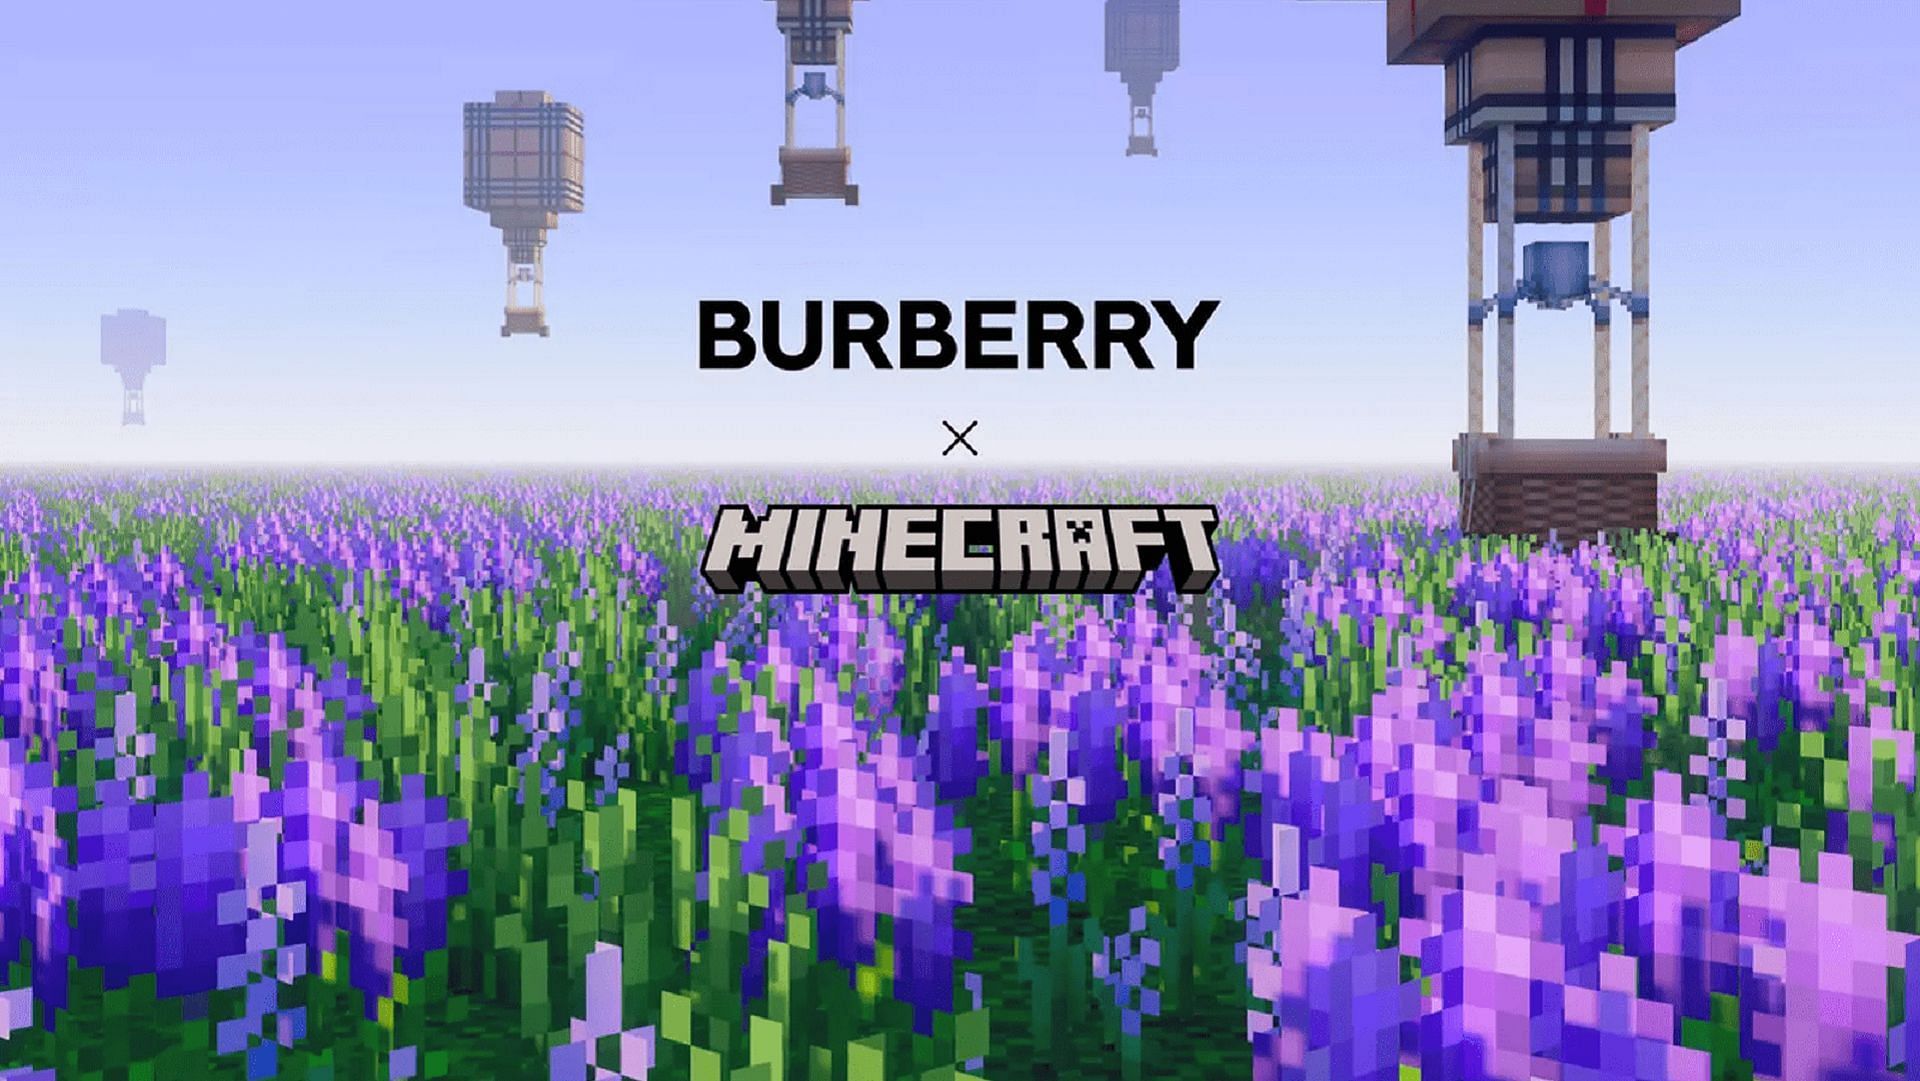 Burberry is the latest member of Minecraft